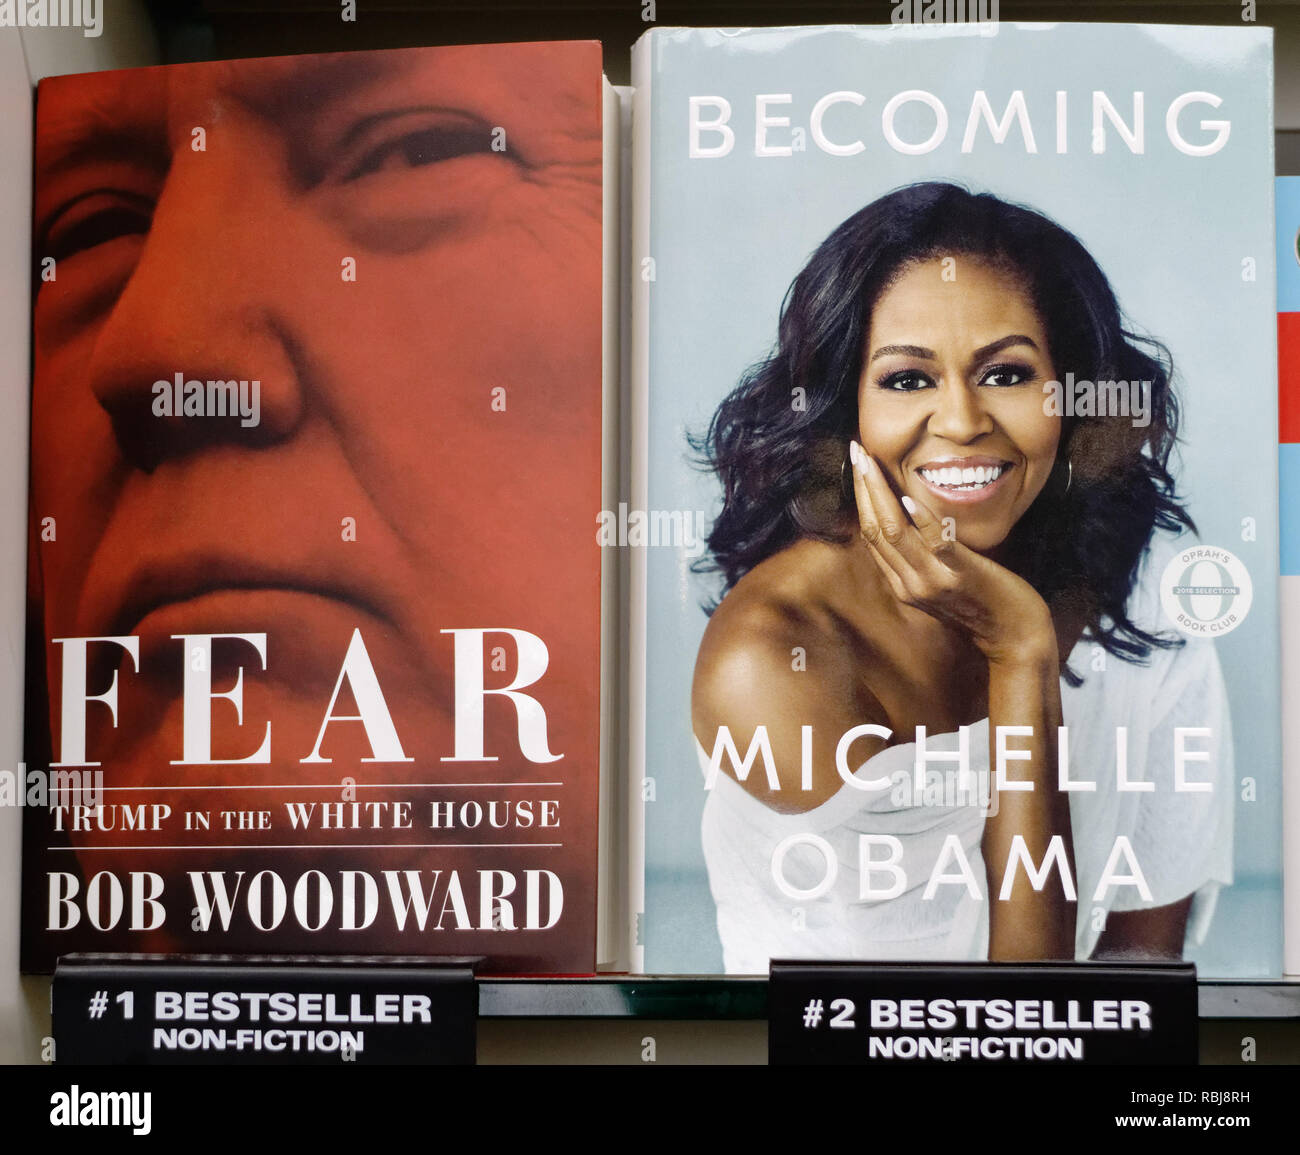 Fear: Trump in the White House and Becoming by Michelle Obama books side by side on a shelf in a shop Stock Photo